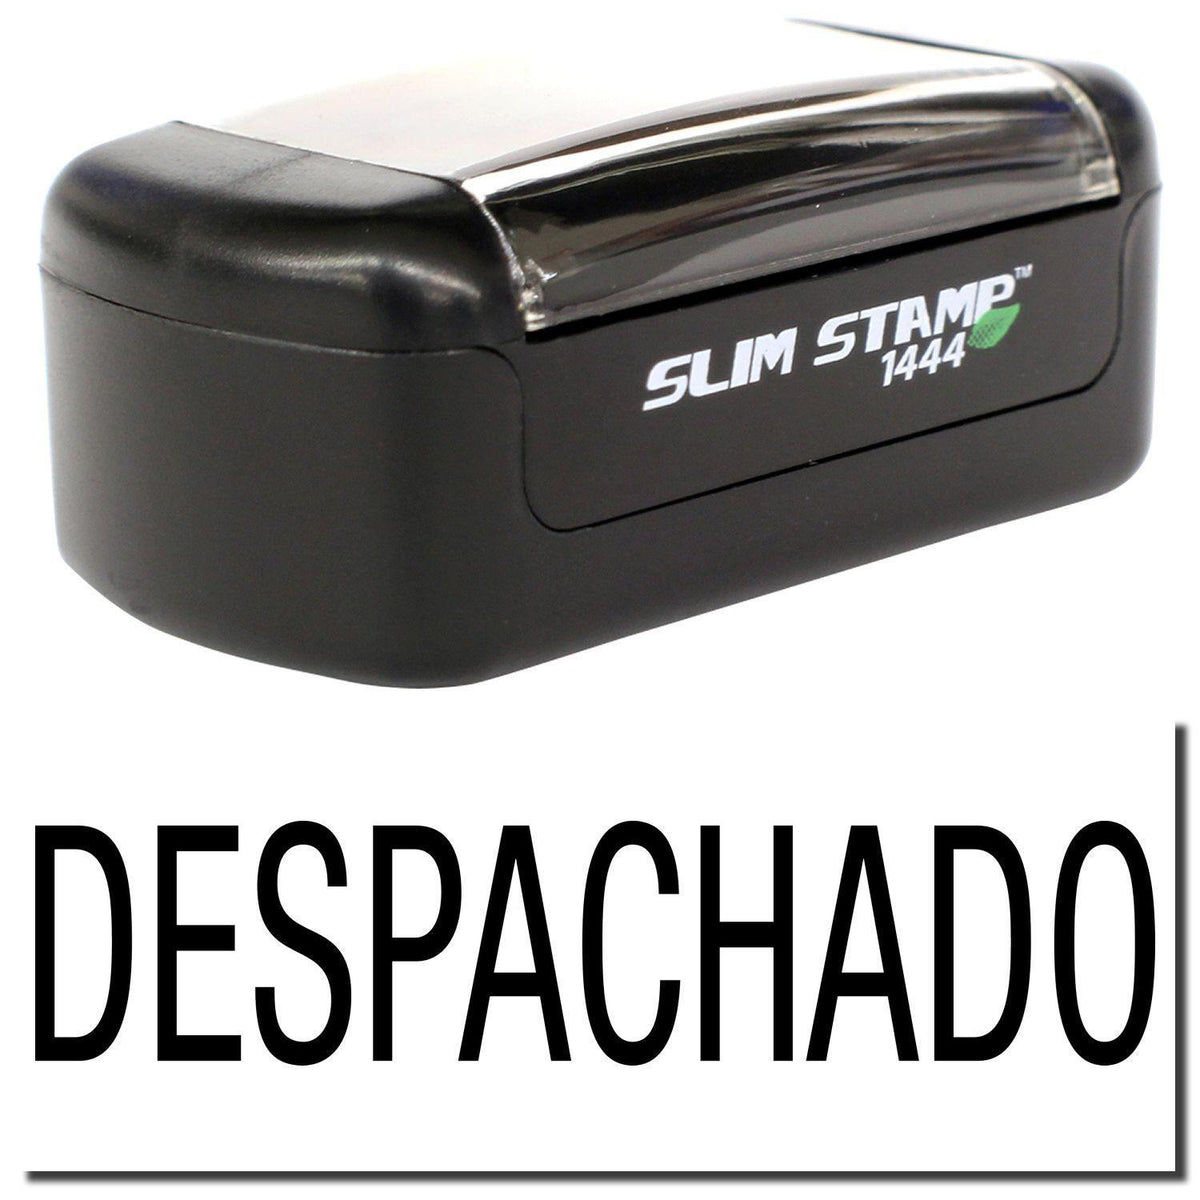 A stock office pre-inked stamp with a stamped image showing how the text &quot;DESPACHADO&quot; is displayed after stamping.